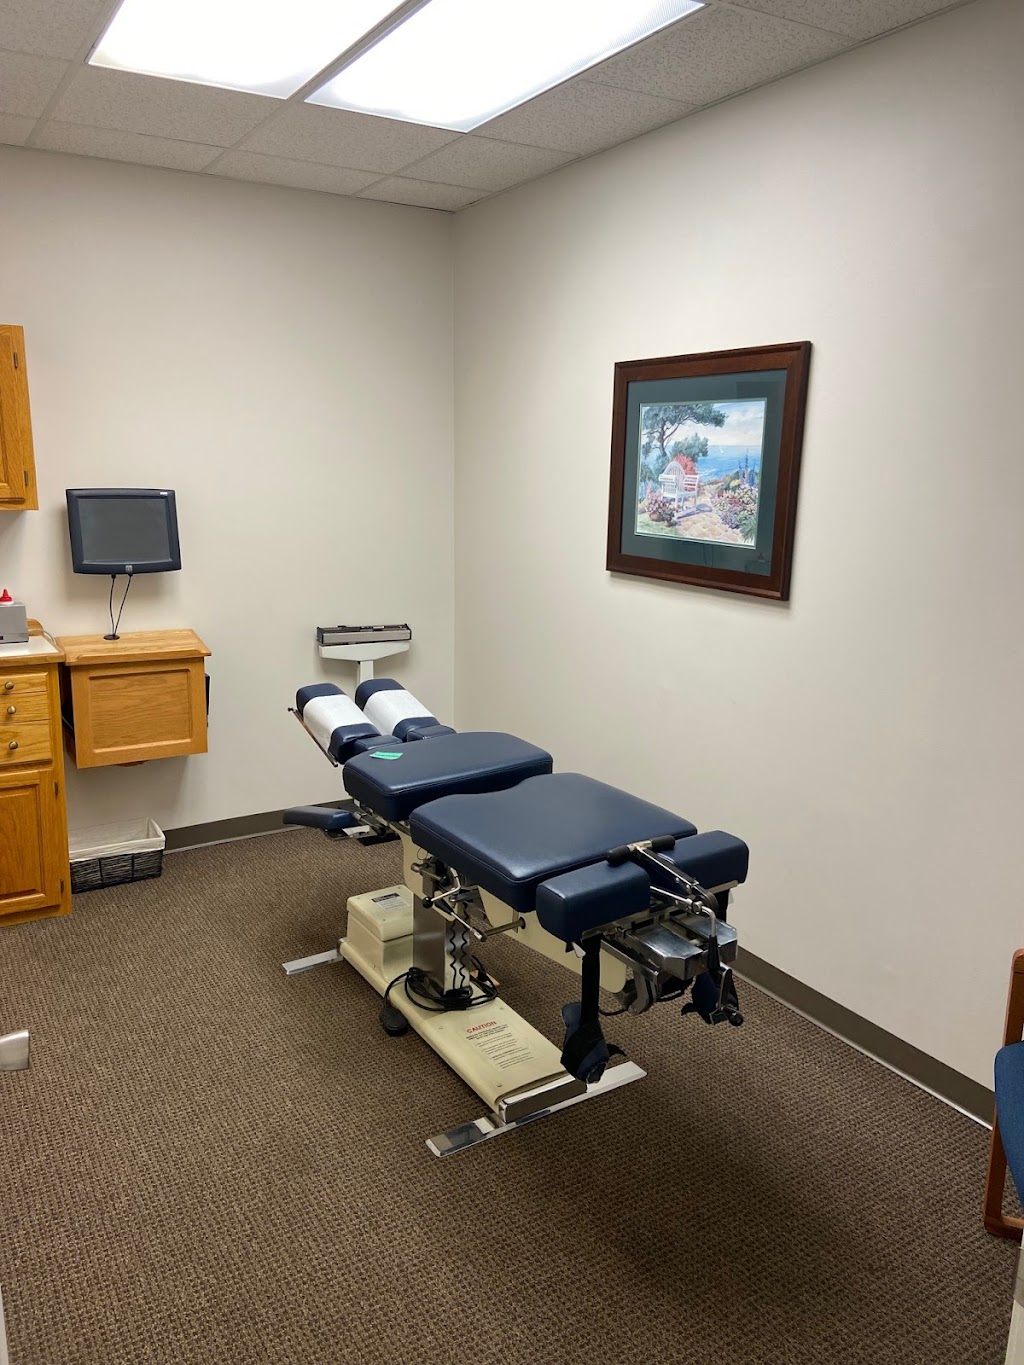 Premier Rehab: Chiropractic and Pain | 4460 N Illinois St, Swansea, IL 62226 | Phone: (618) 236-3738